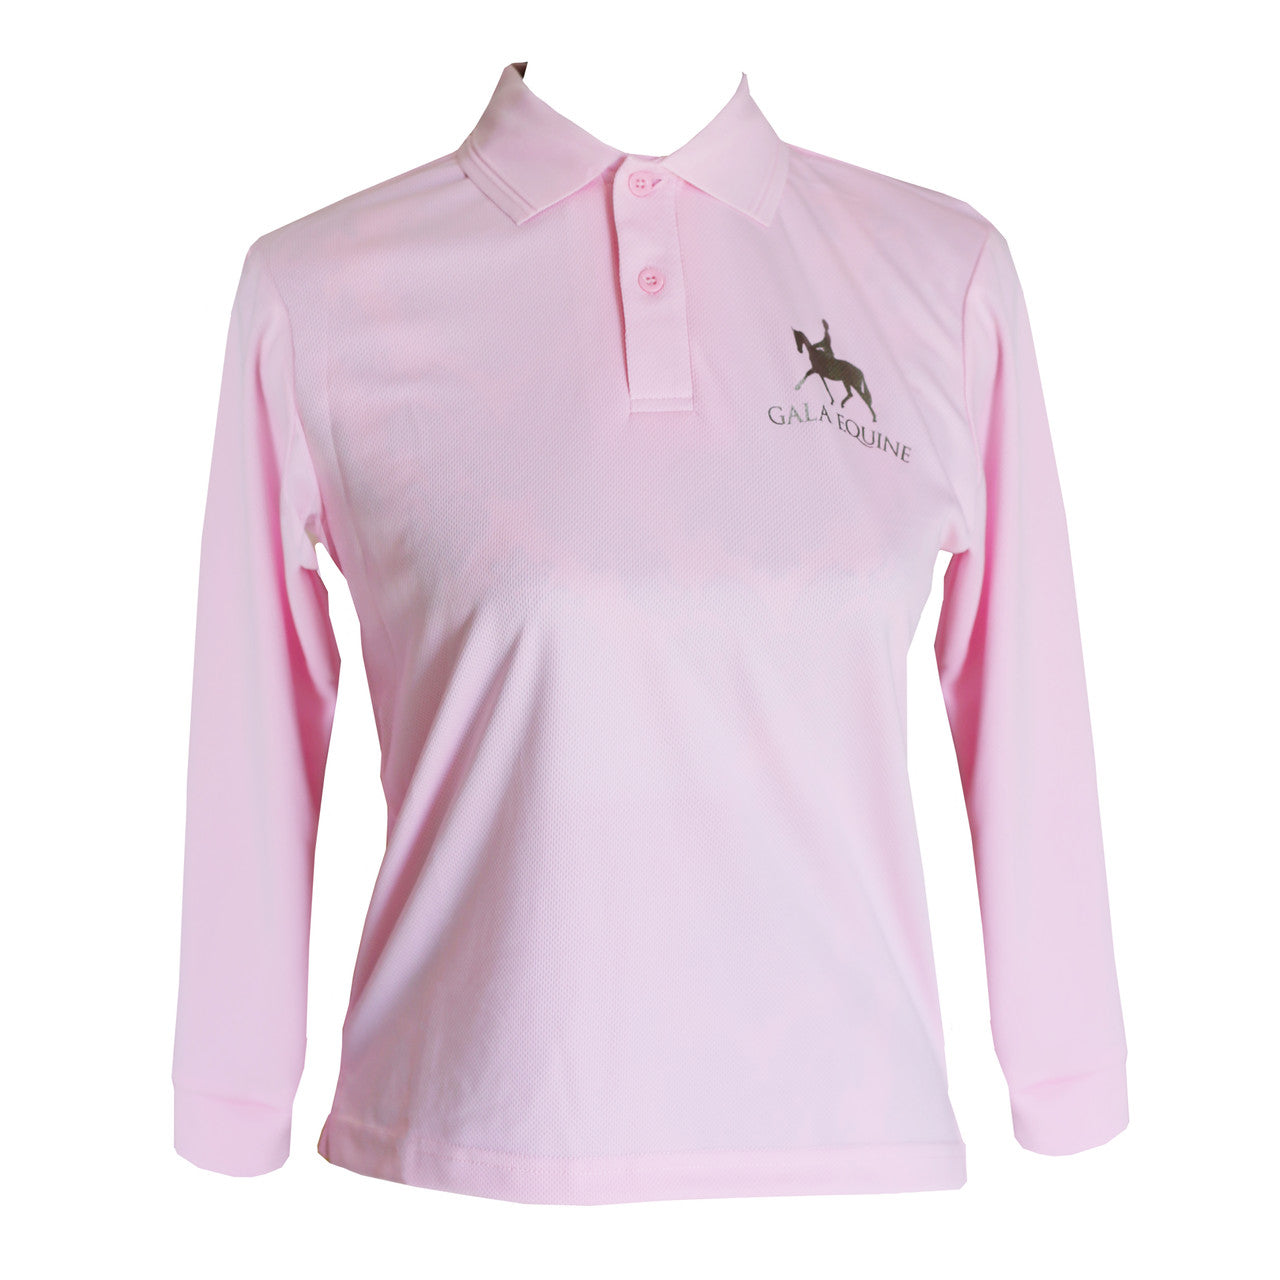 Childs Breezeway Long Sleeve Polo - Design your Own!